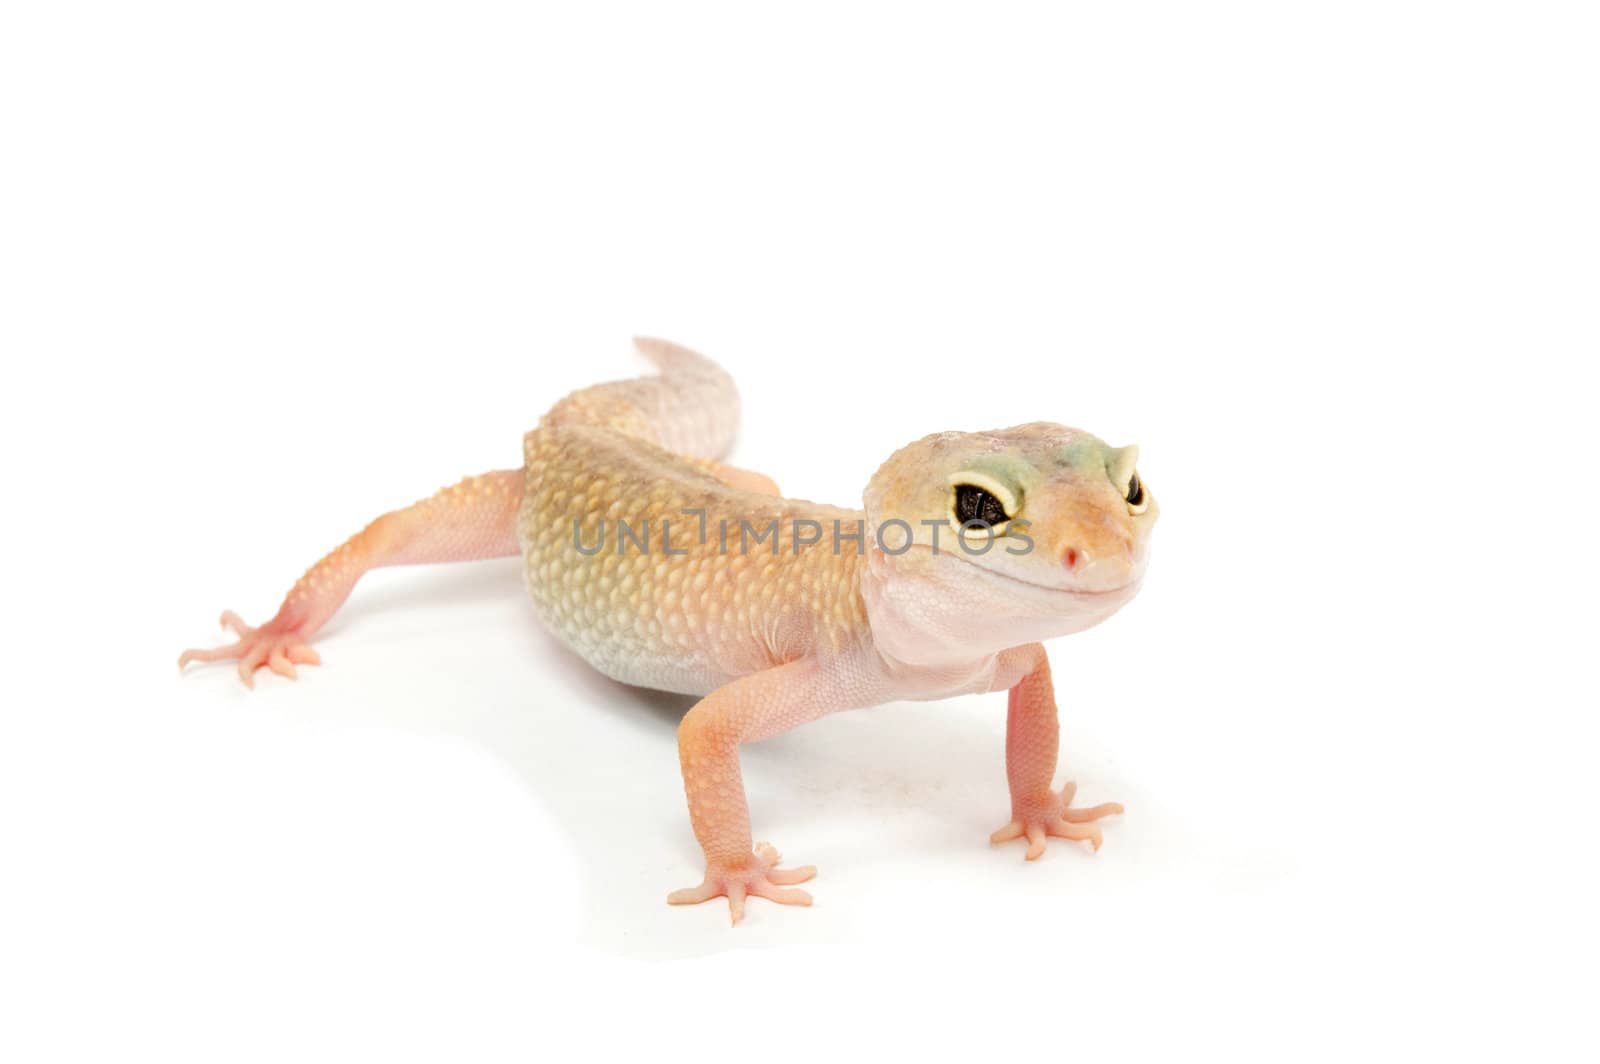 Gecko in front of a white background  by ladyminnie